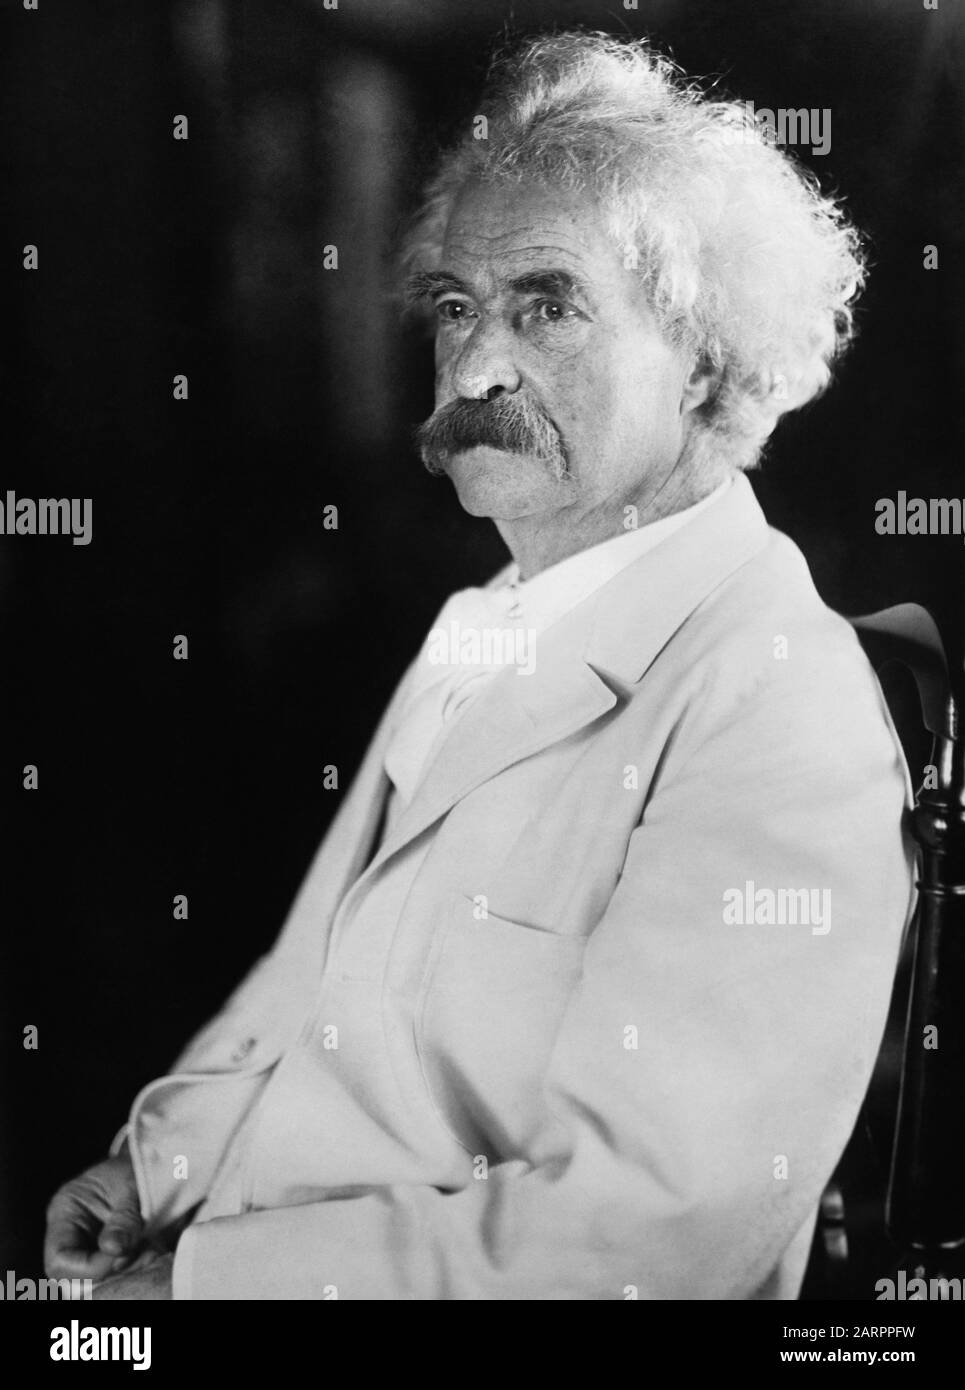 Vintage portrait photo of American writer and humourist Samuel Langhorne Clemens (1835 – 1910), better known by his pen name of Mark Twain. Photo circa 1905 by Bain News Service. Stock Photo